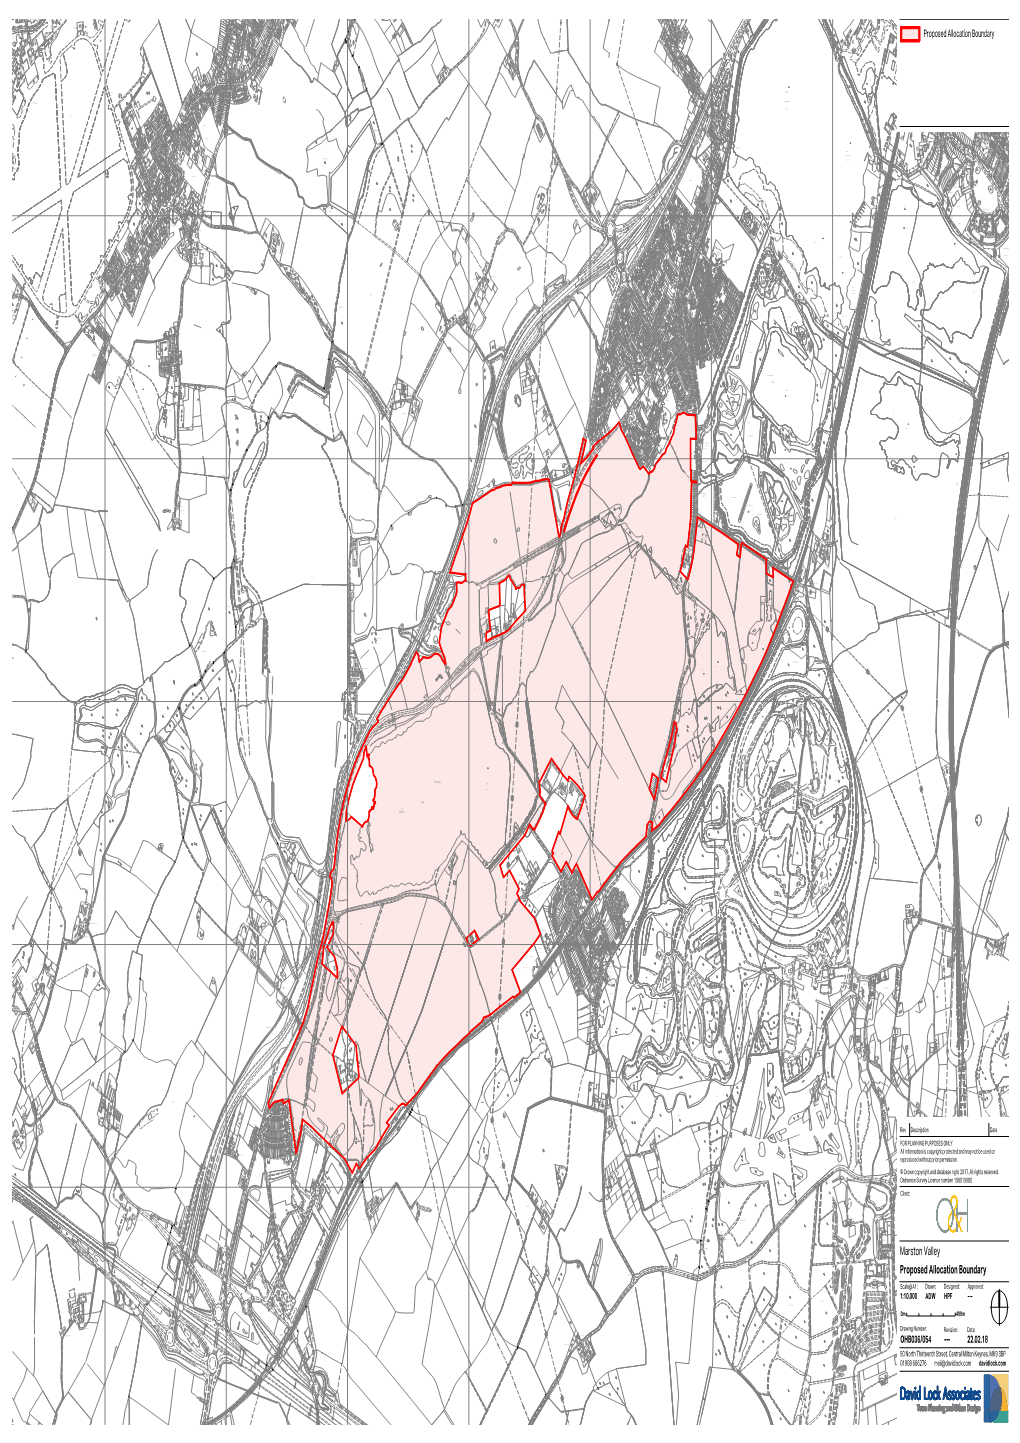 Marston Valley Proposed Allocation Boundary